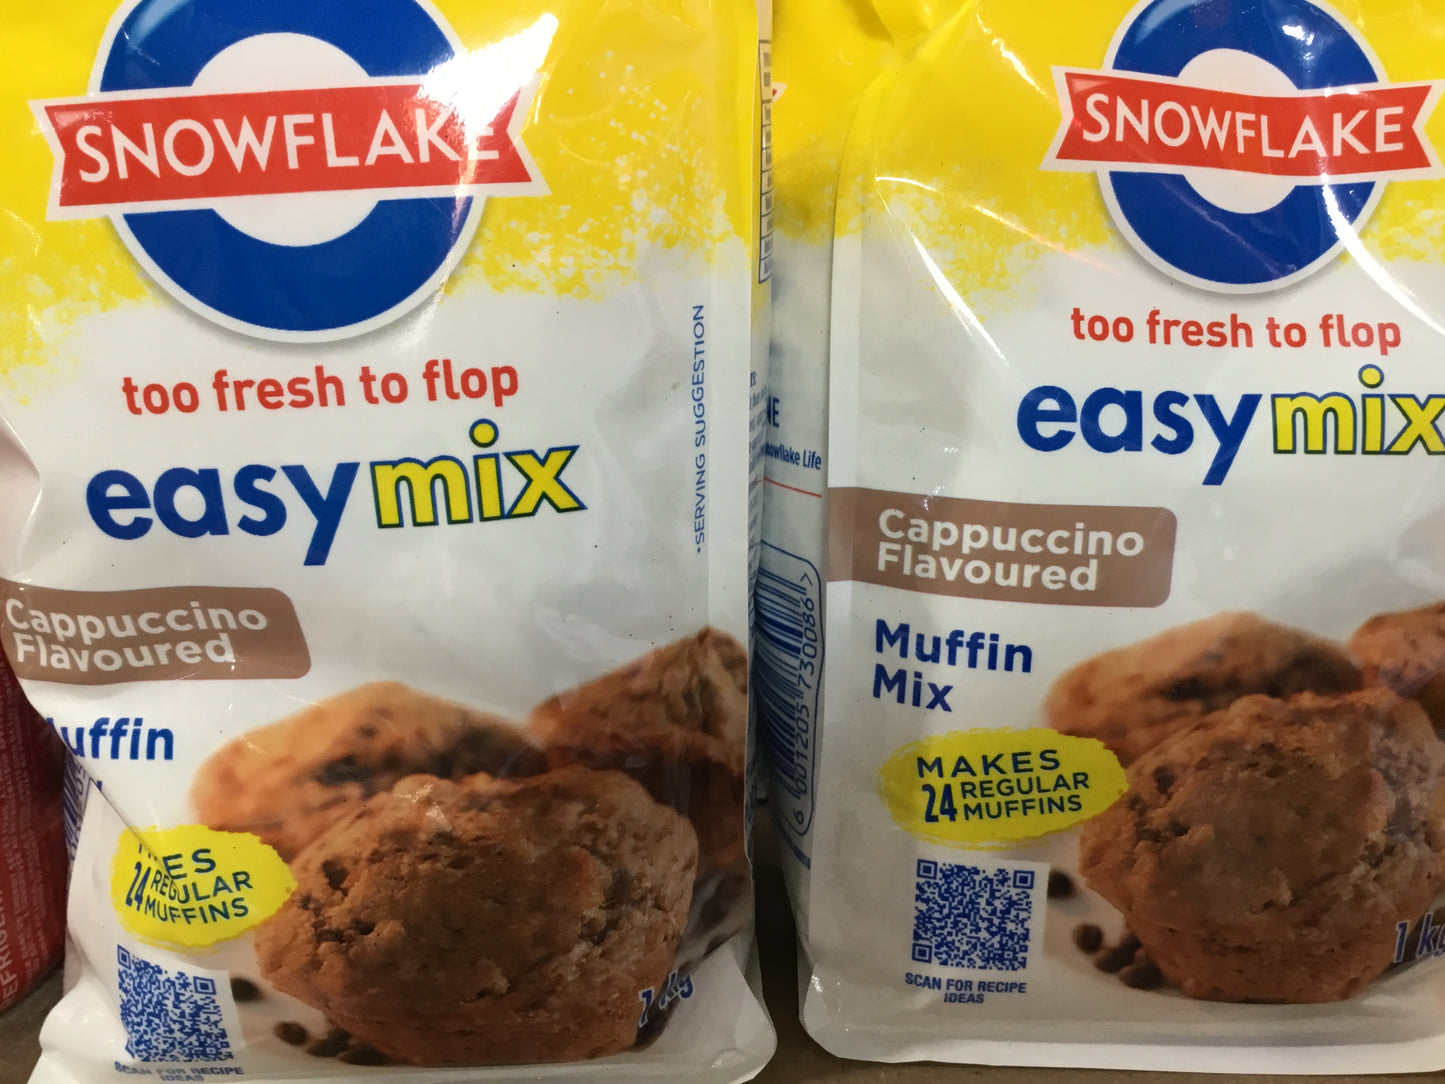 Snowflake Easymix - Muffin Cappaccino Mix 1kg